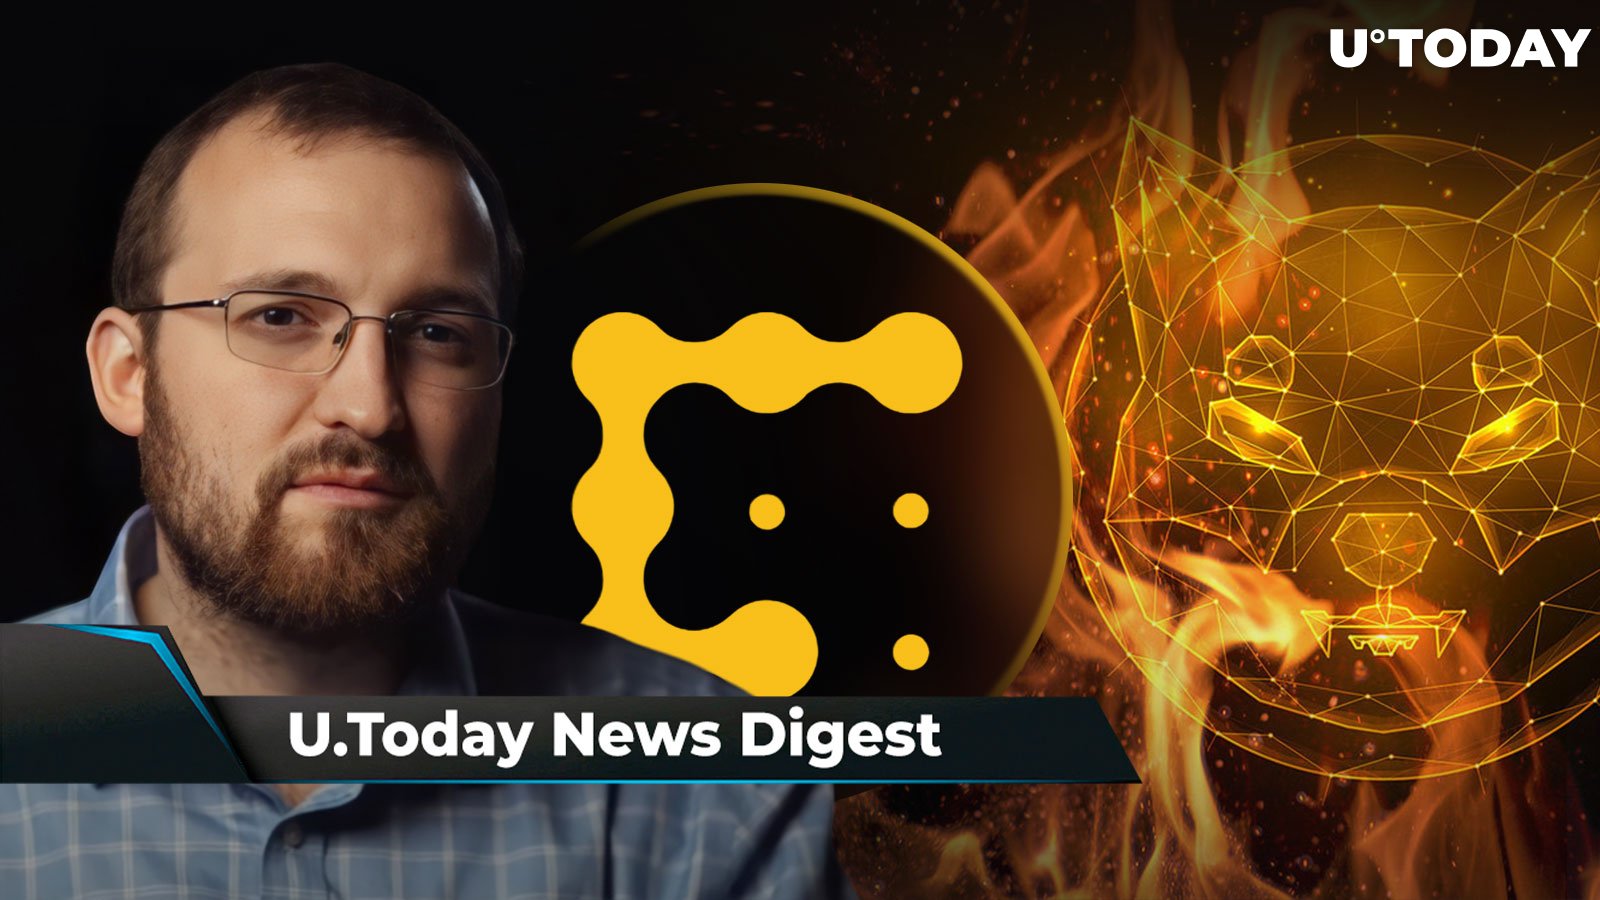 Cardano’s Charles Hoskinson Might Make Bid for Coindesk, Millions of SHIB Burned as Price Jumps, FTX Reportedly Making Comeback: Crypto News Digest by U.Today